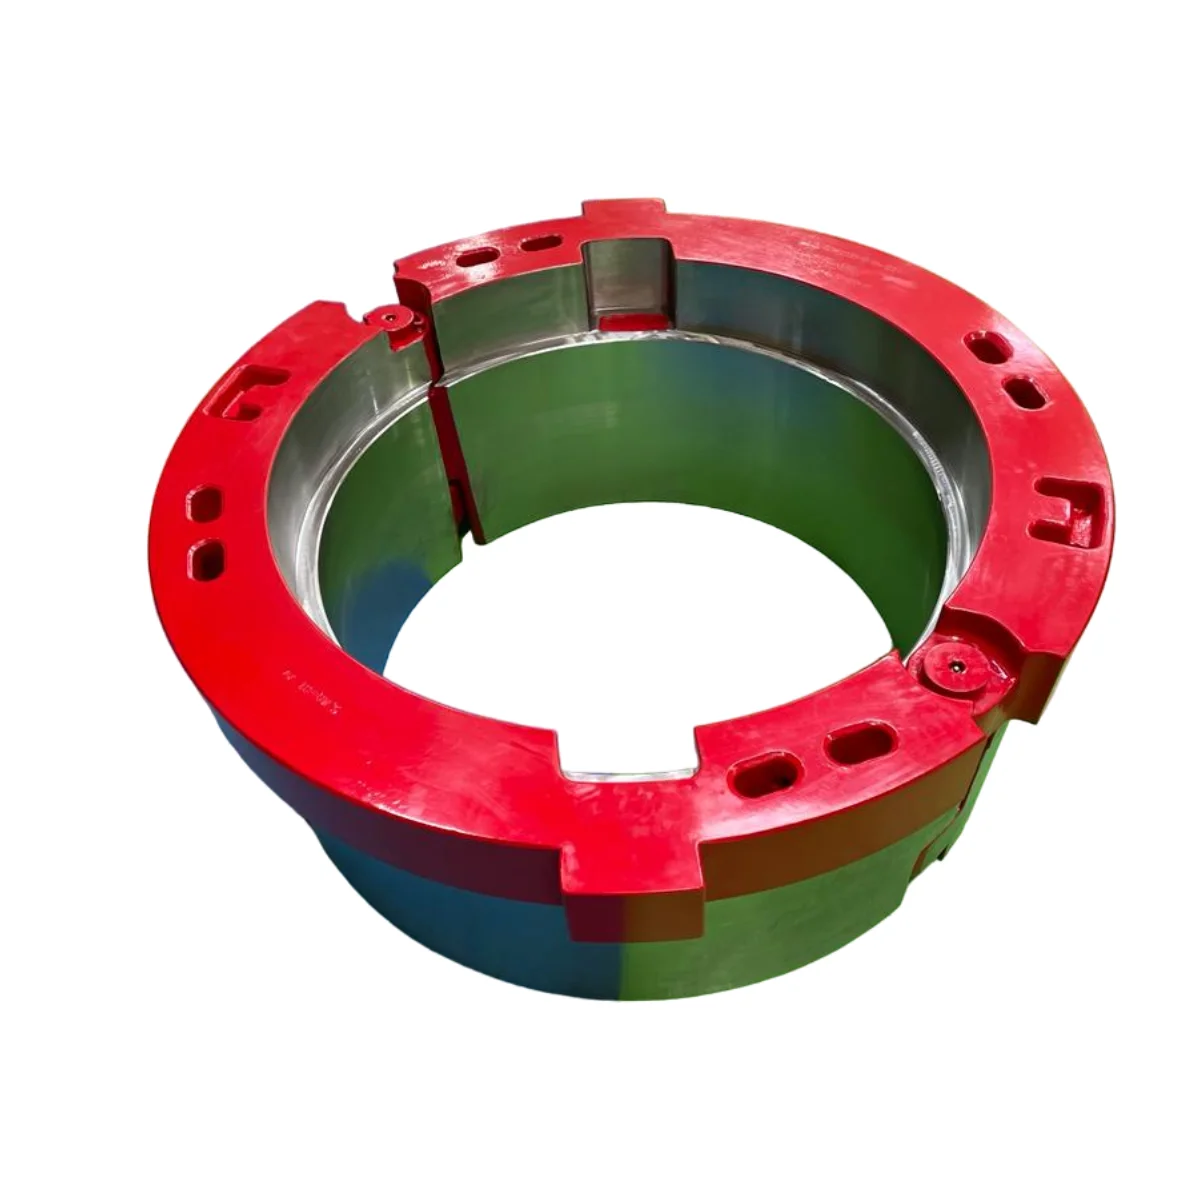 Equivalent adapter ring image featuring NOV, Wirth, DenCon, Varco, Oilwell, Emsco, HMH, National, Forum, and BVM brands.